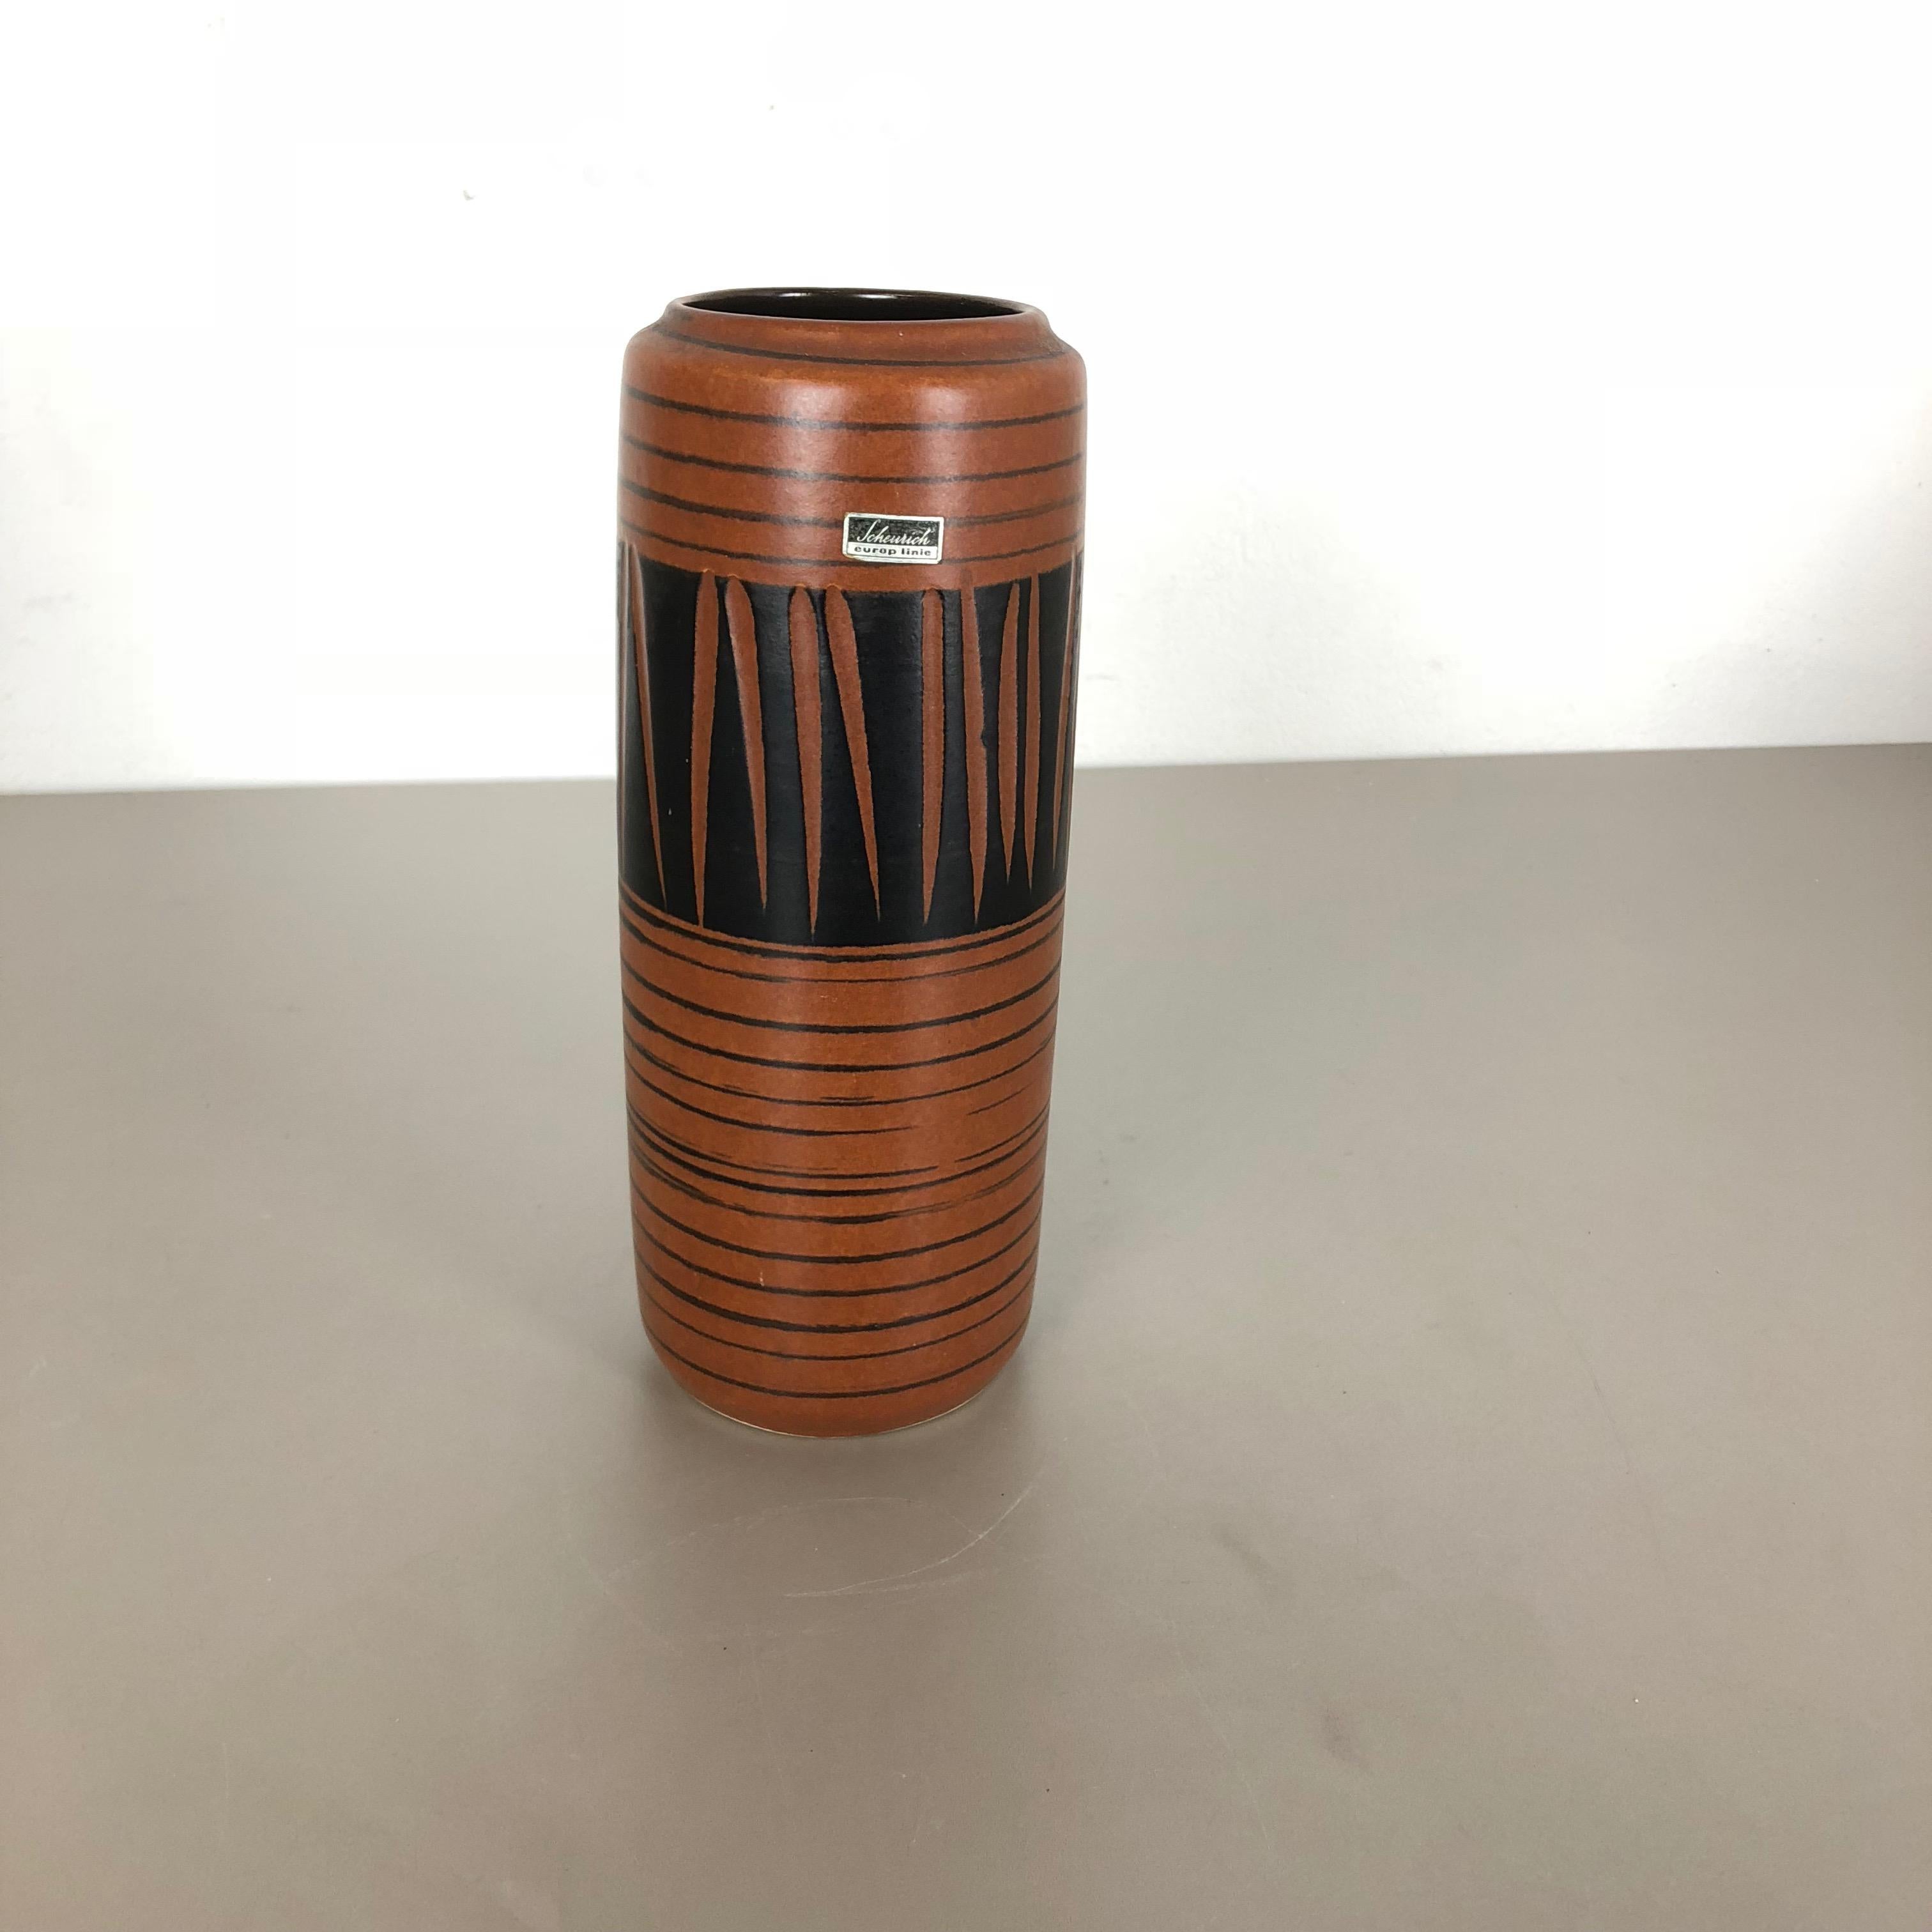 Article:

Fat lava art vase super rare brown coloration and pattern


Model: 532-28


Producer:

Scheurich, Germany



Decade:

1970s


This original vintage vase was produced in the 1970s in Germany by Scheurich. It is made of